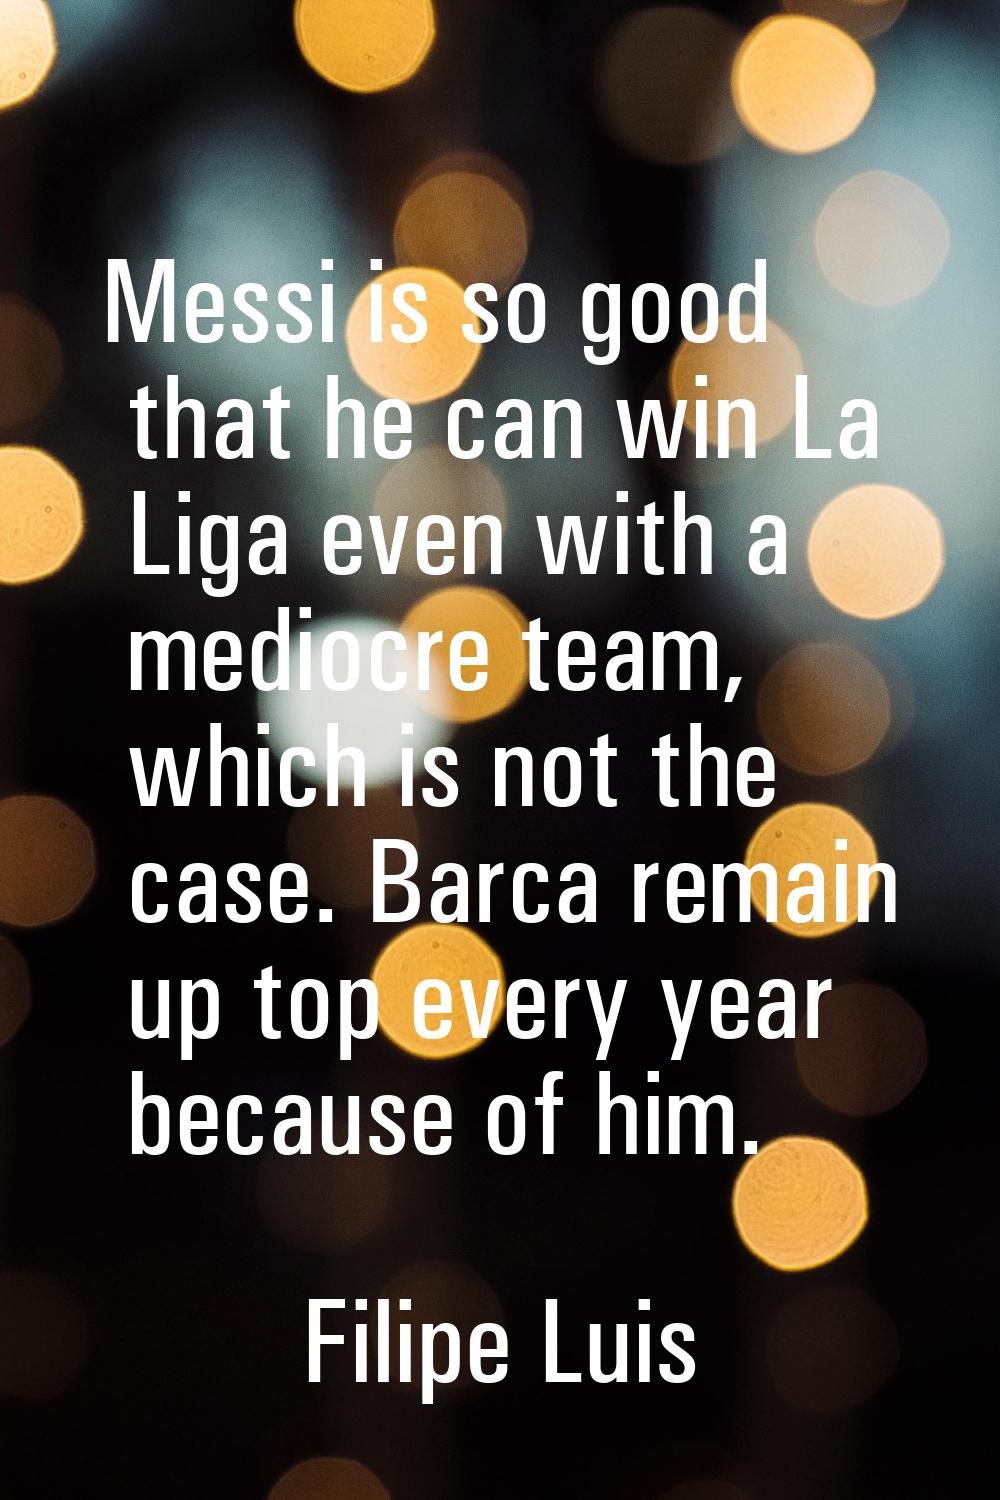 Messi is so good that he can win La Liga even with a mediocre team, which is not the case. Barca re